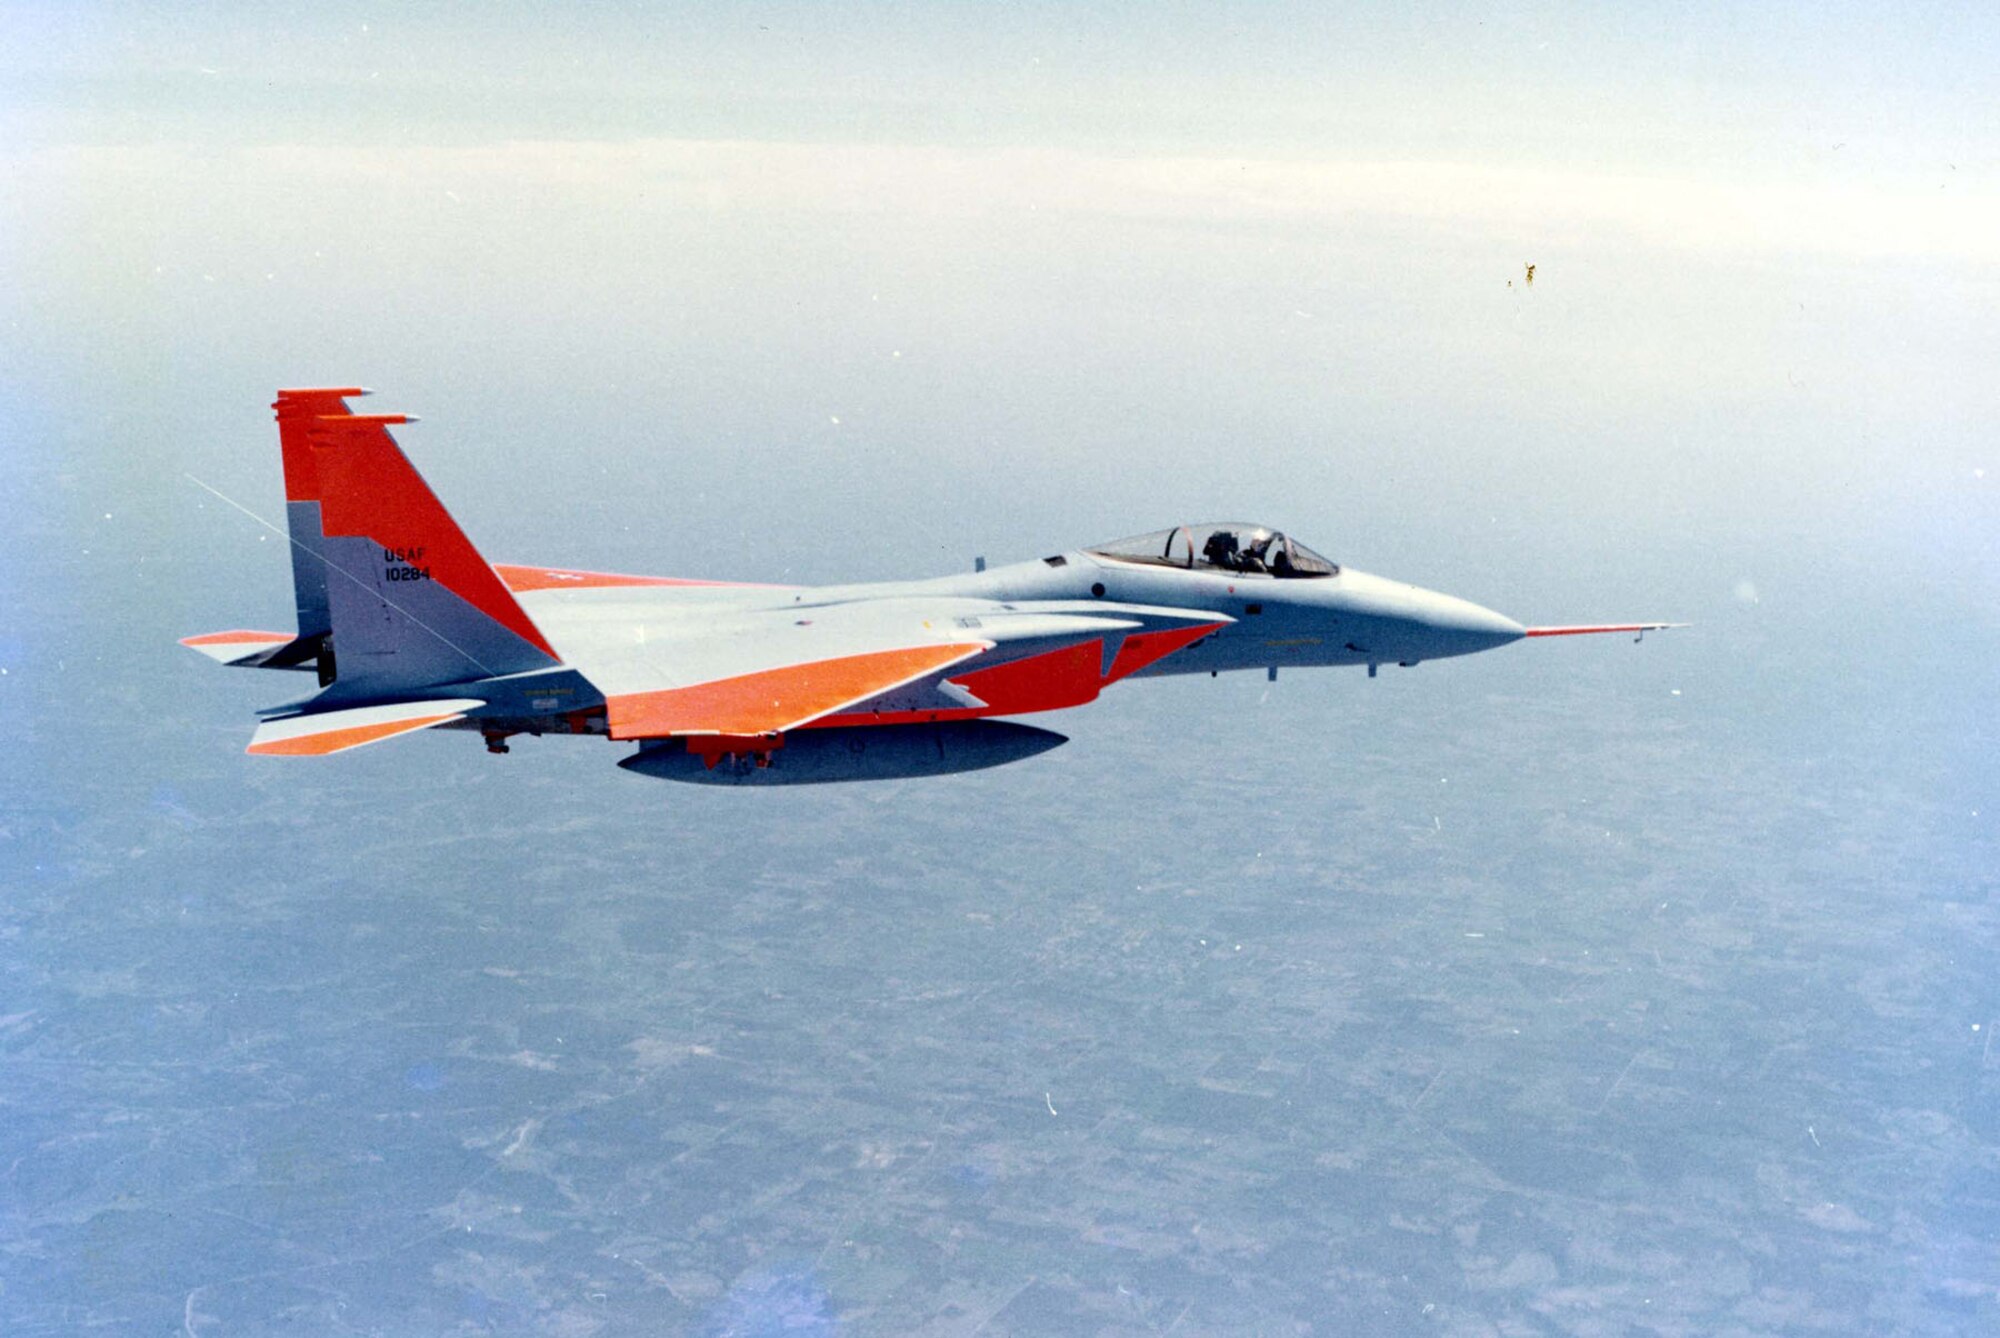 McDonnell Douglas F-15A (S/N 71-0284, the fifth prototype) in flight. (U.S. Air Force photo)